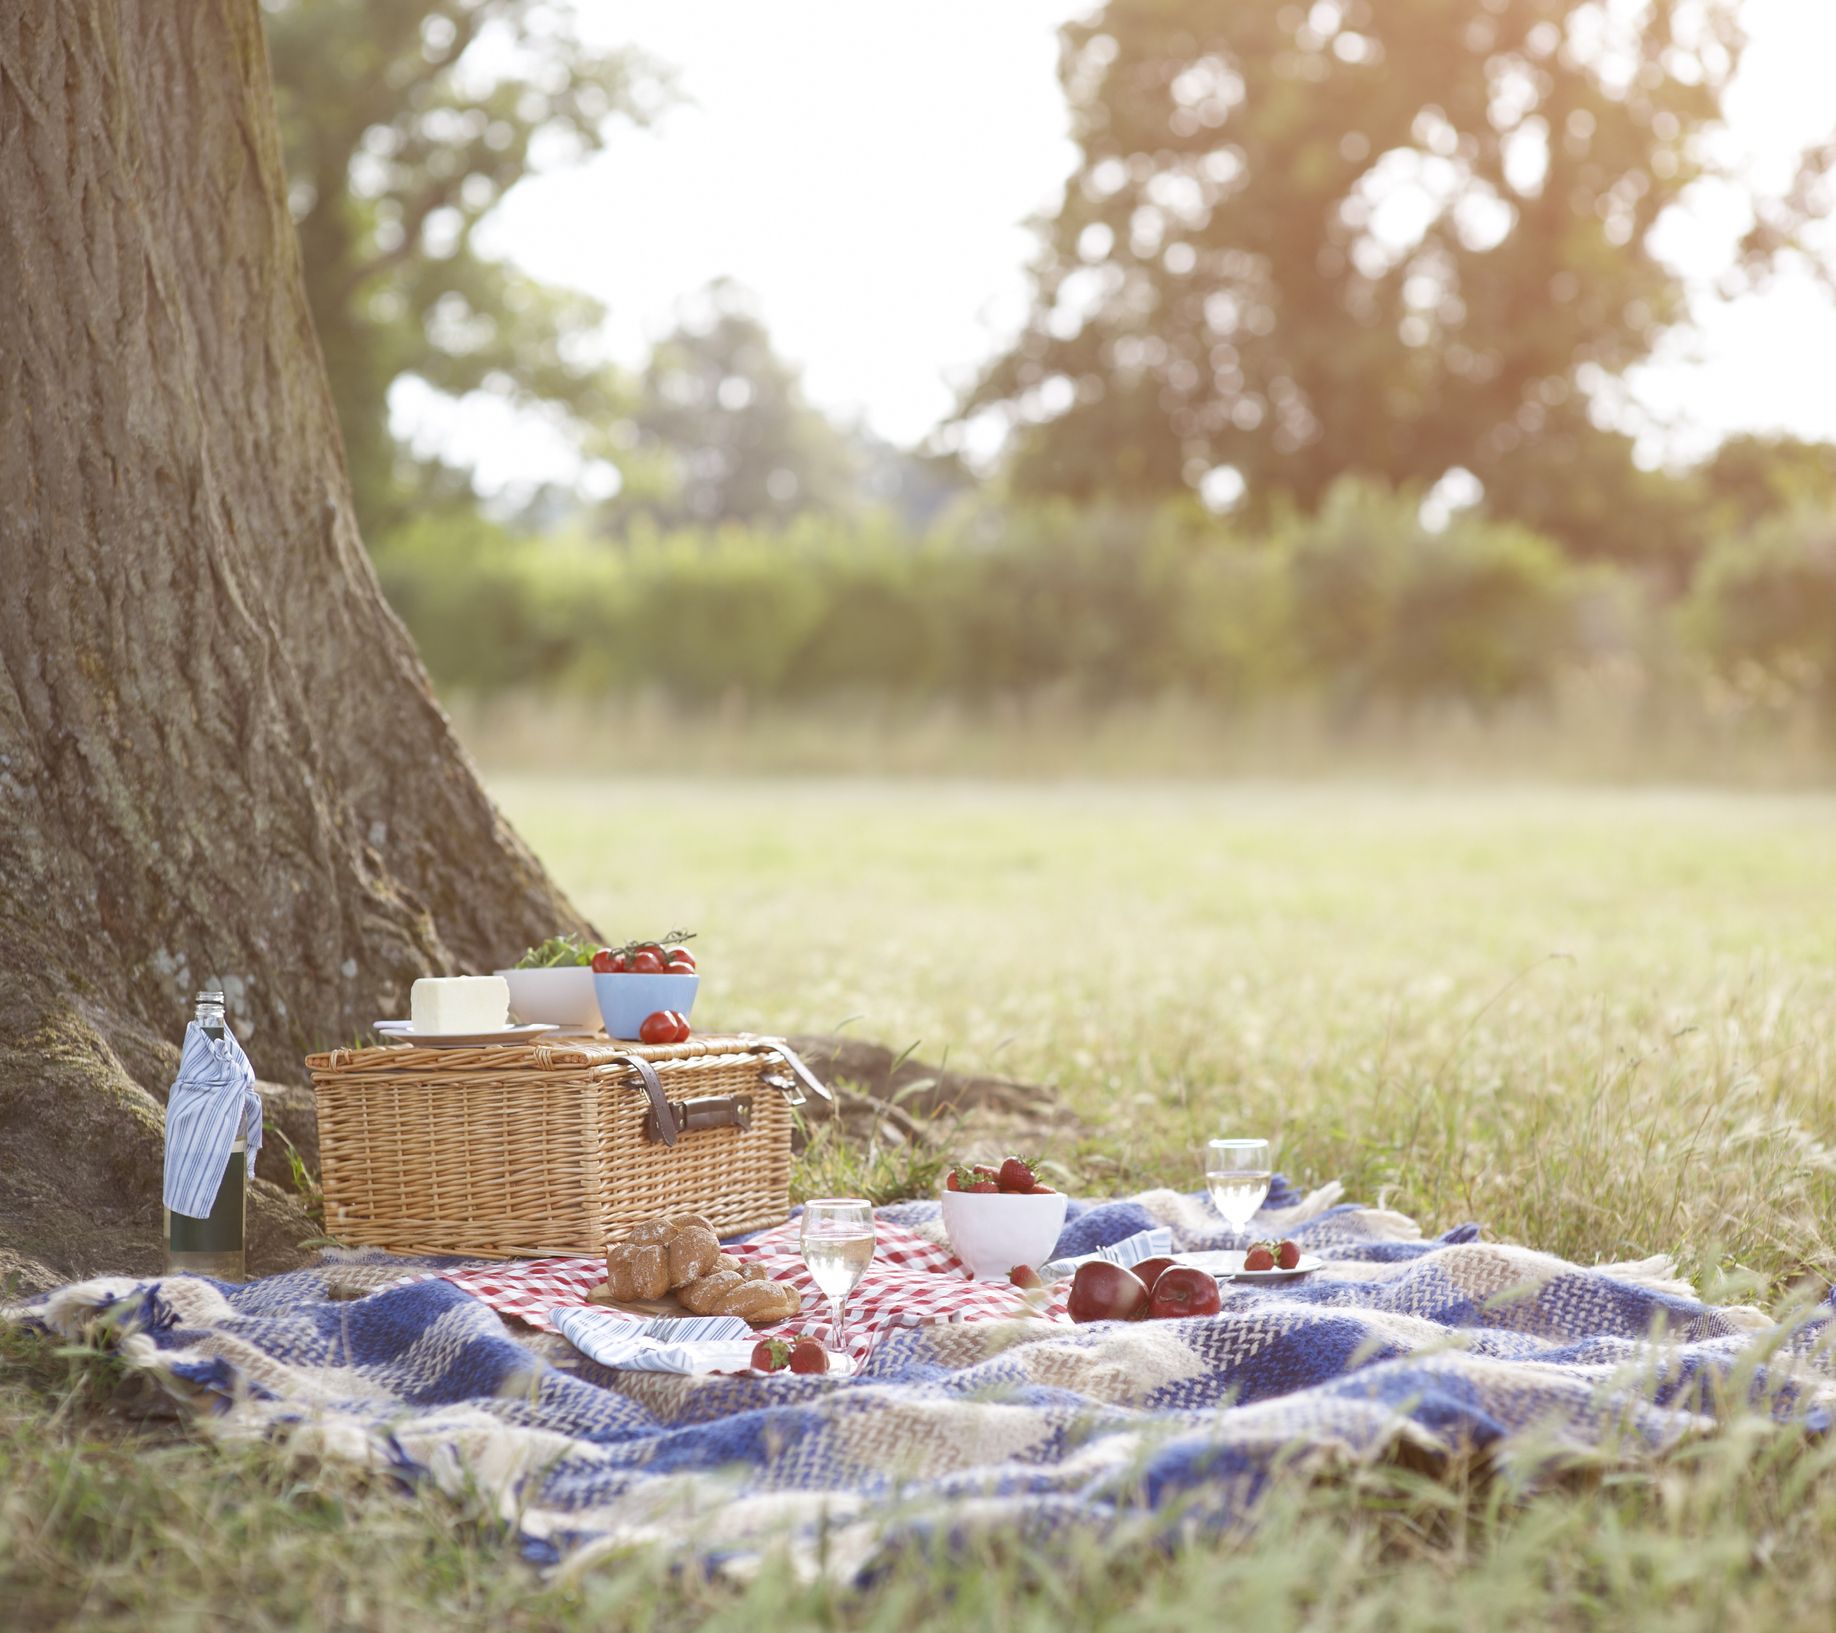 11 Best Picnic Accessories 2018: Blanket, Basket, and More